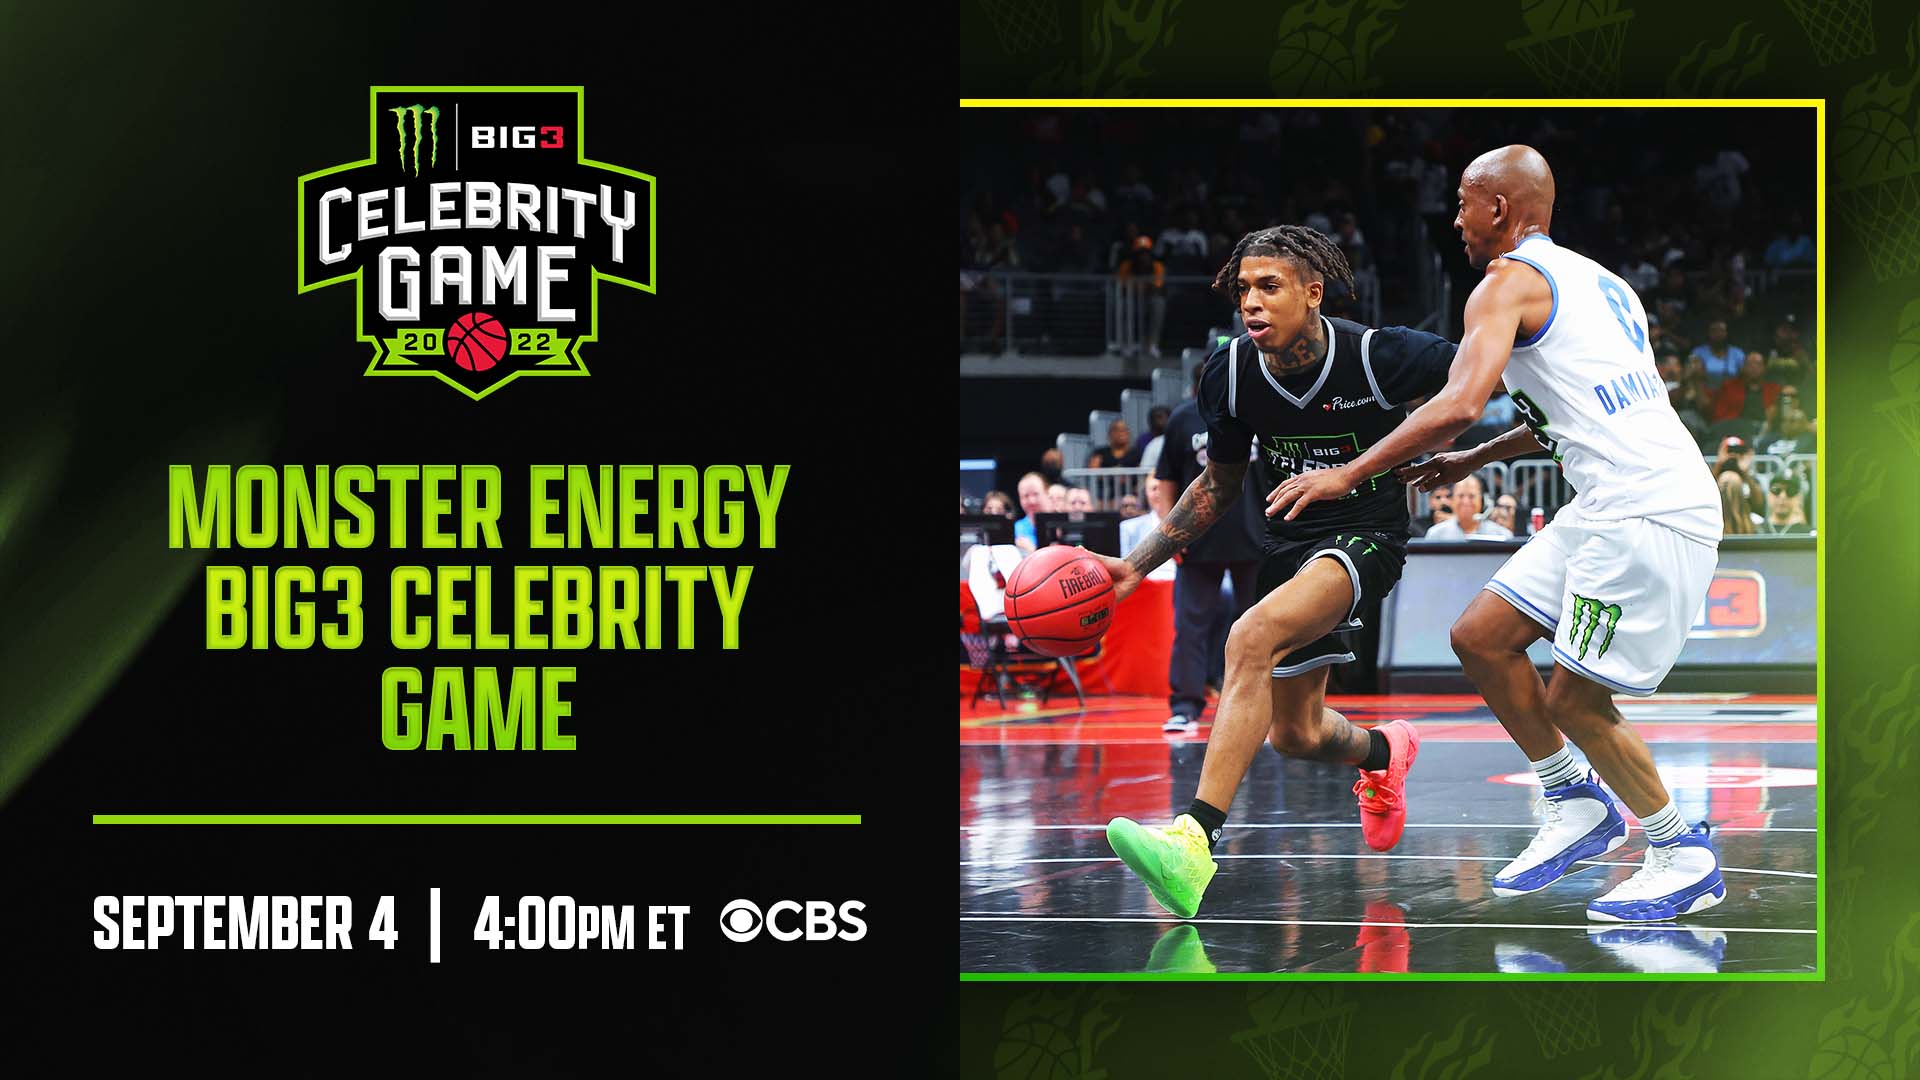 ESPN to exclusively televise 2020 NBA All-Star Celebrity Game